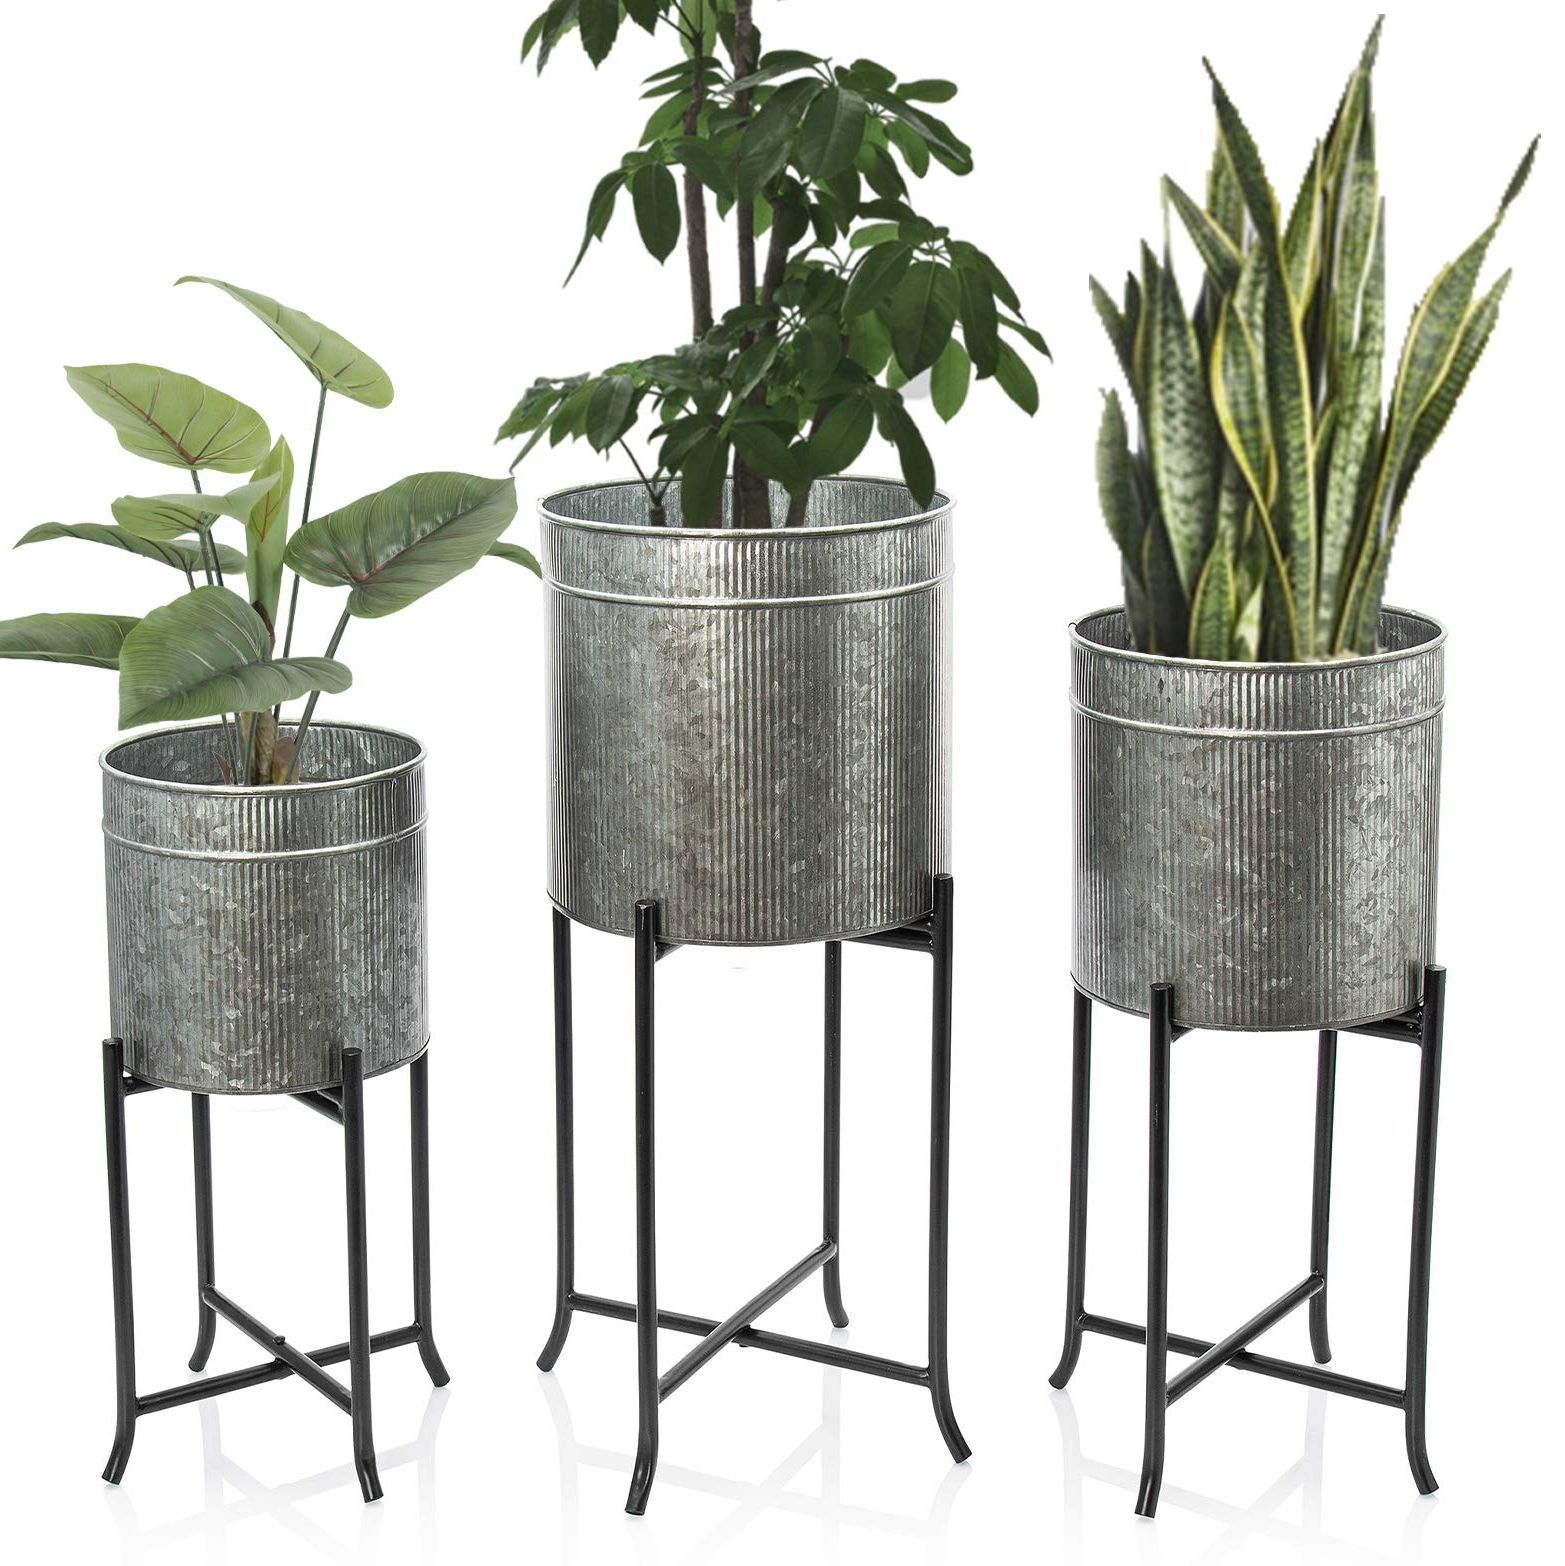 Set 3 Large Galvanized Planters Outdoor & Indoor, Metal Farmhouse Decor For  Garden, Patio, Porch & Intended For Latest Galvanized Plant Stands (View 9 of 15)